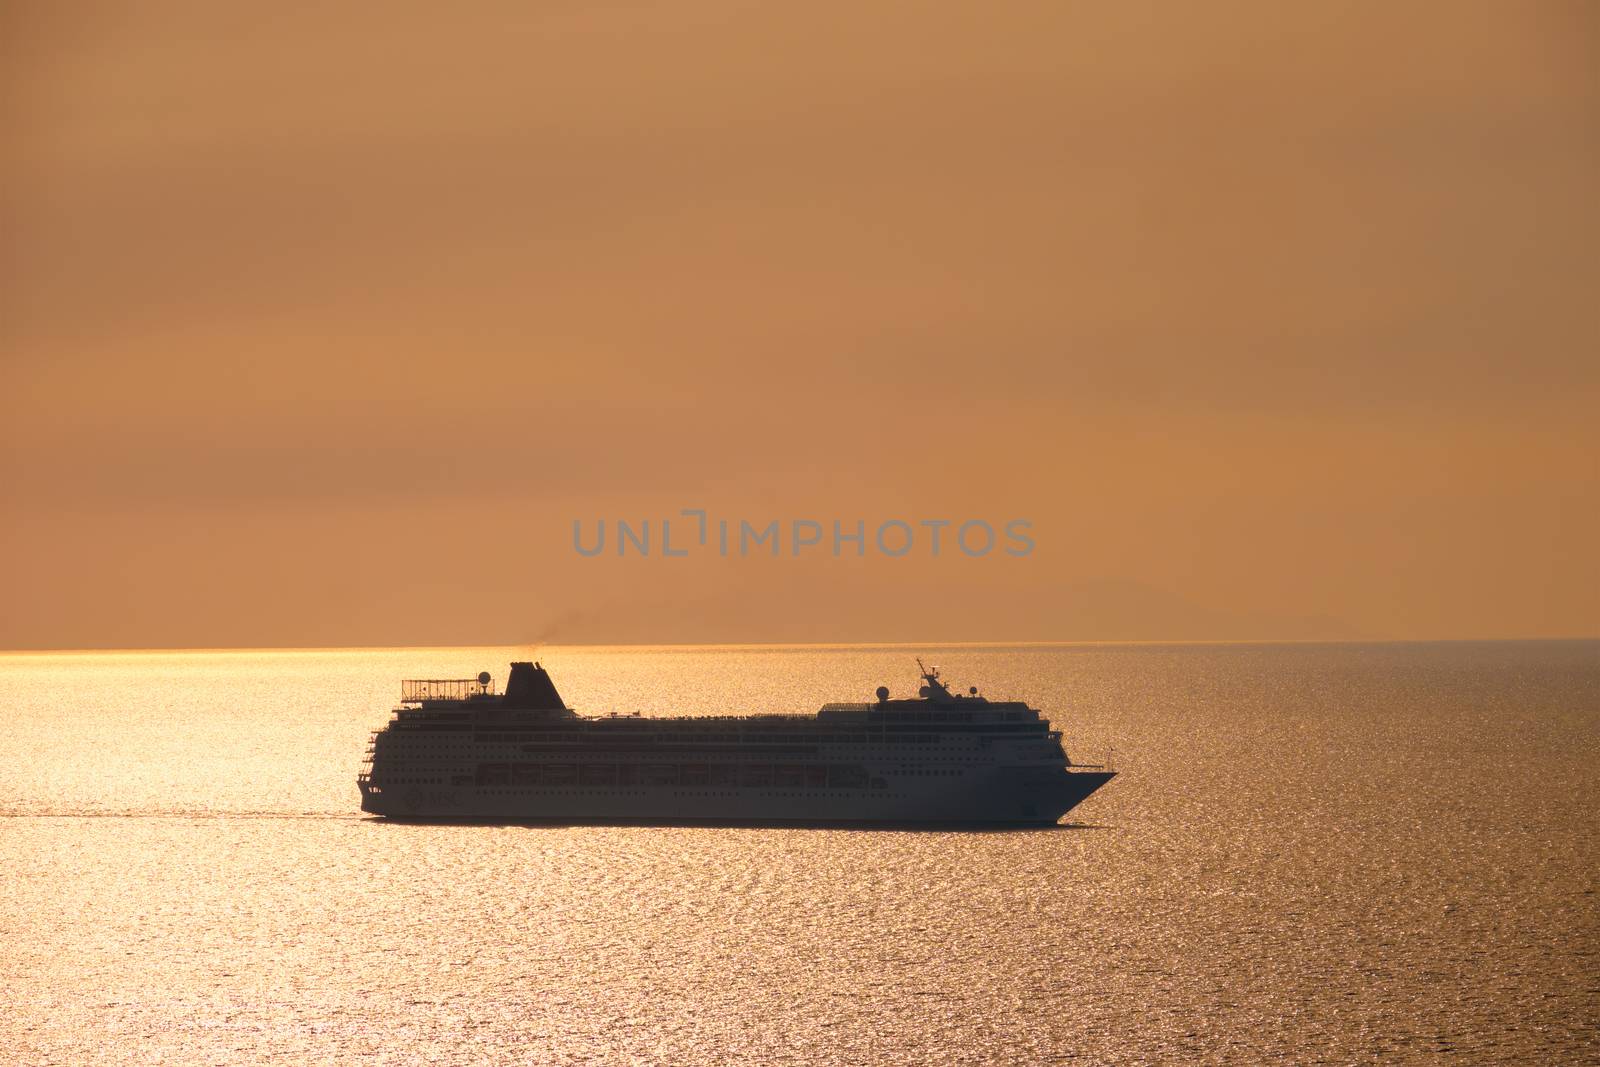 Cruise ship silhouette in Aegean sea on sunset by dimol